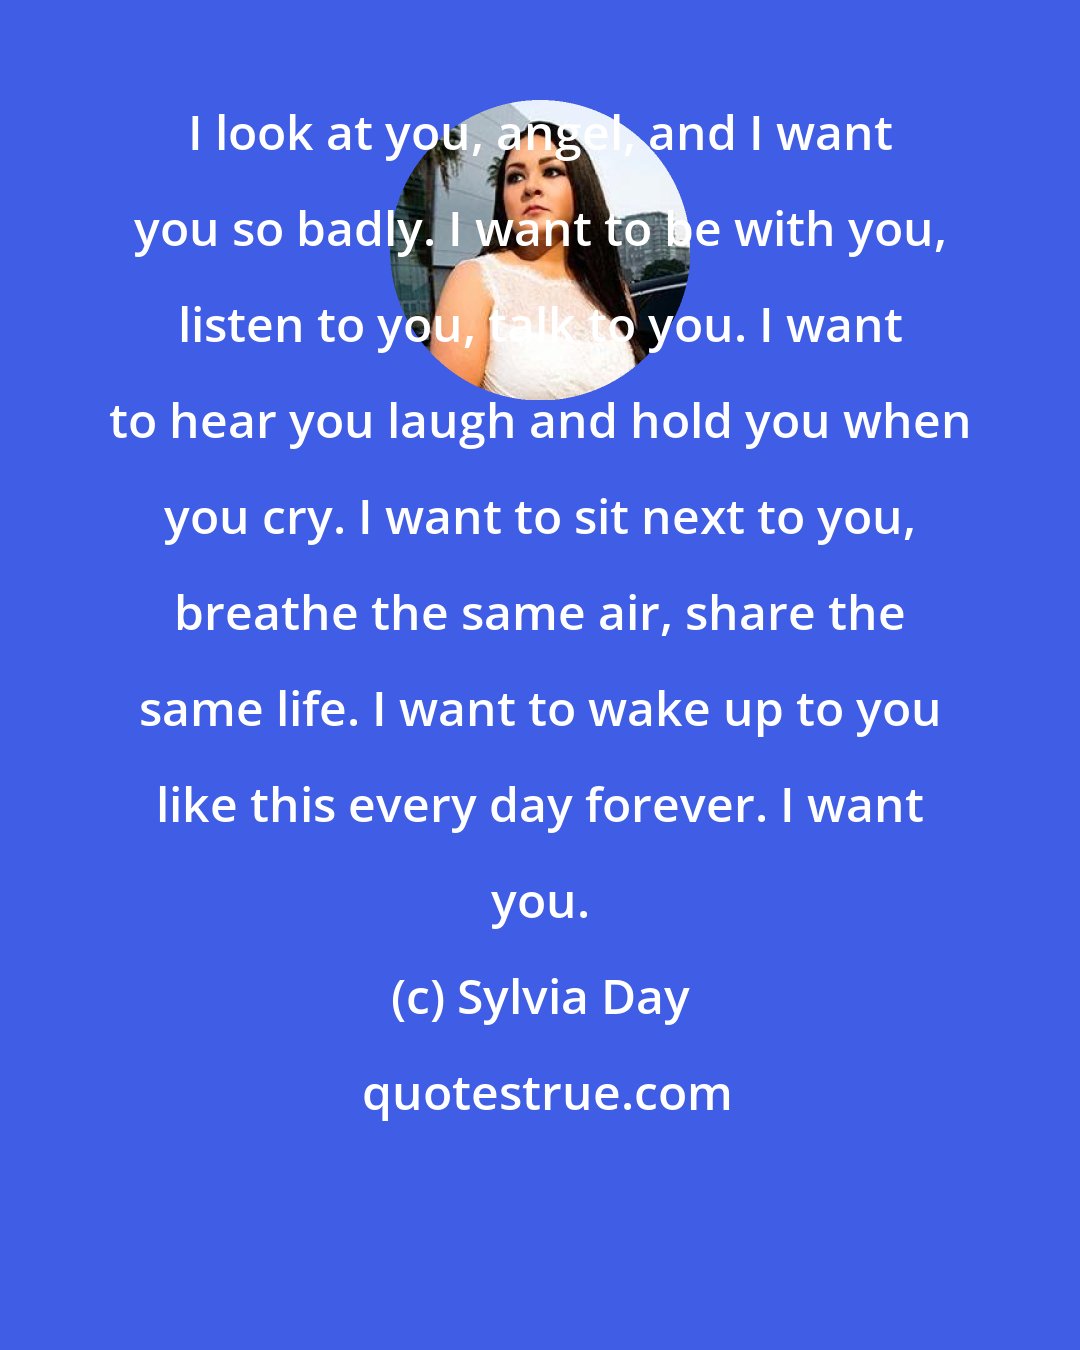 Sylvia Day: I look at you, angel, and I want you so badly. I want to be with you, listen to you, talk to you. I want to hear you laugh and hold you when you cry. I want to sit next to you, breathe the same air, share the same life. I want to wake up to you like this every day forever. I want you.